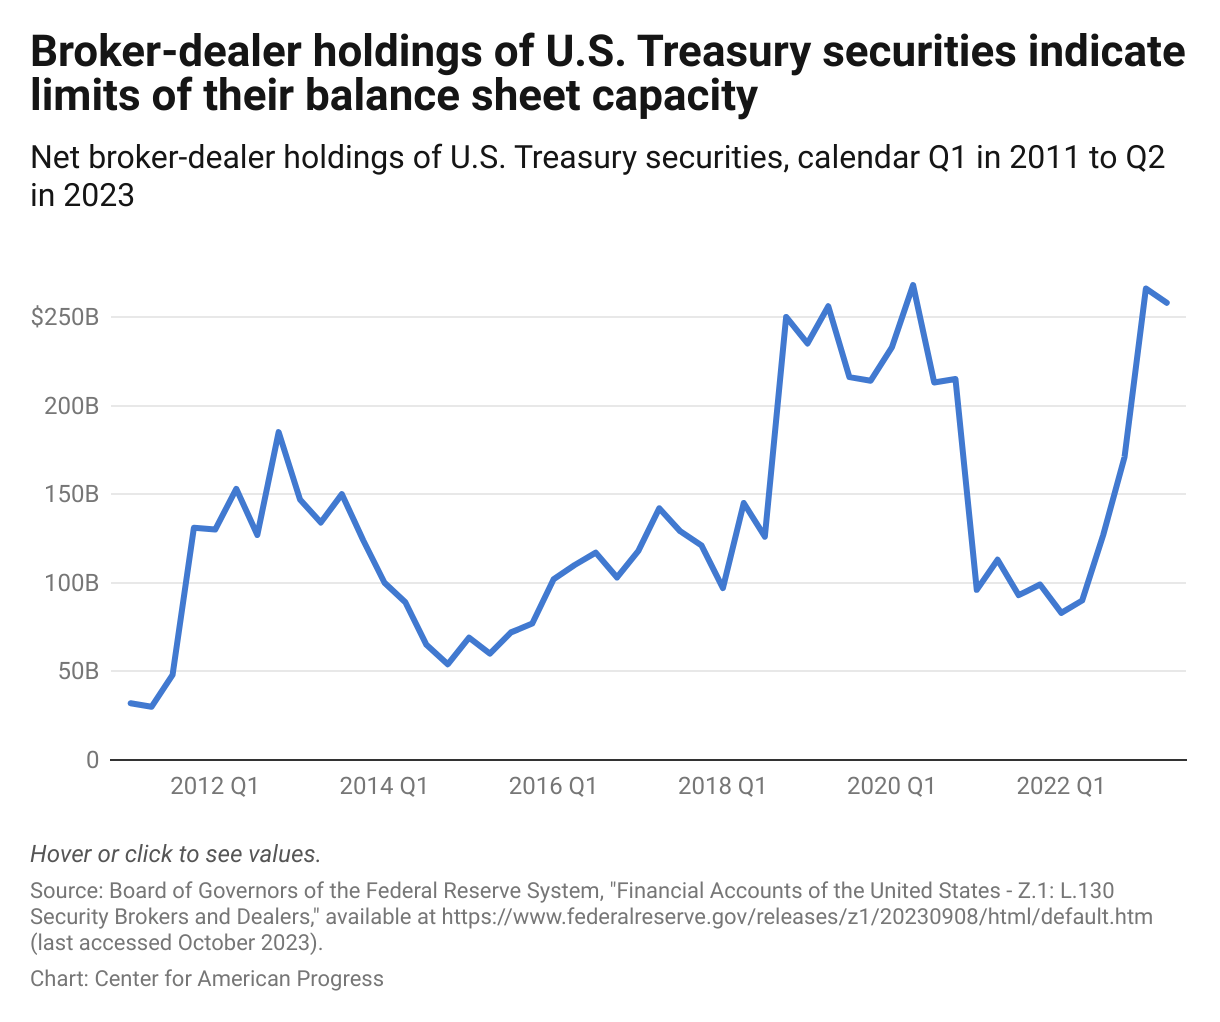 Chart displaying the aggregate broker-dealer net holdings of Treasury securities, indicating limits of their balance sheet capacity.